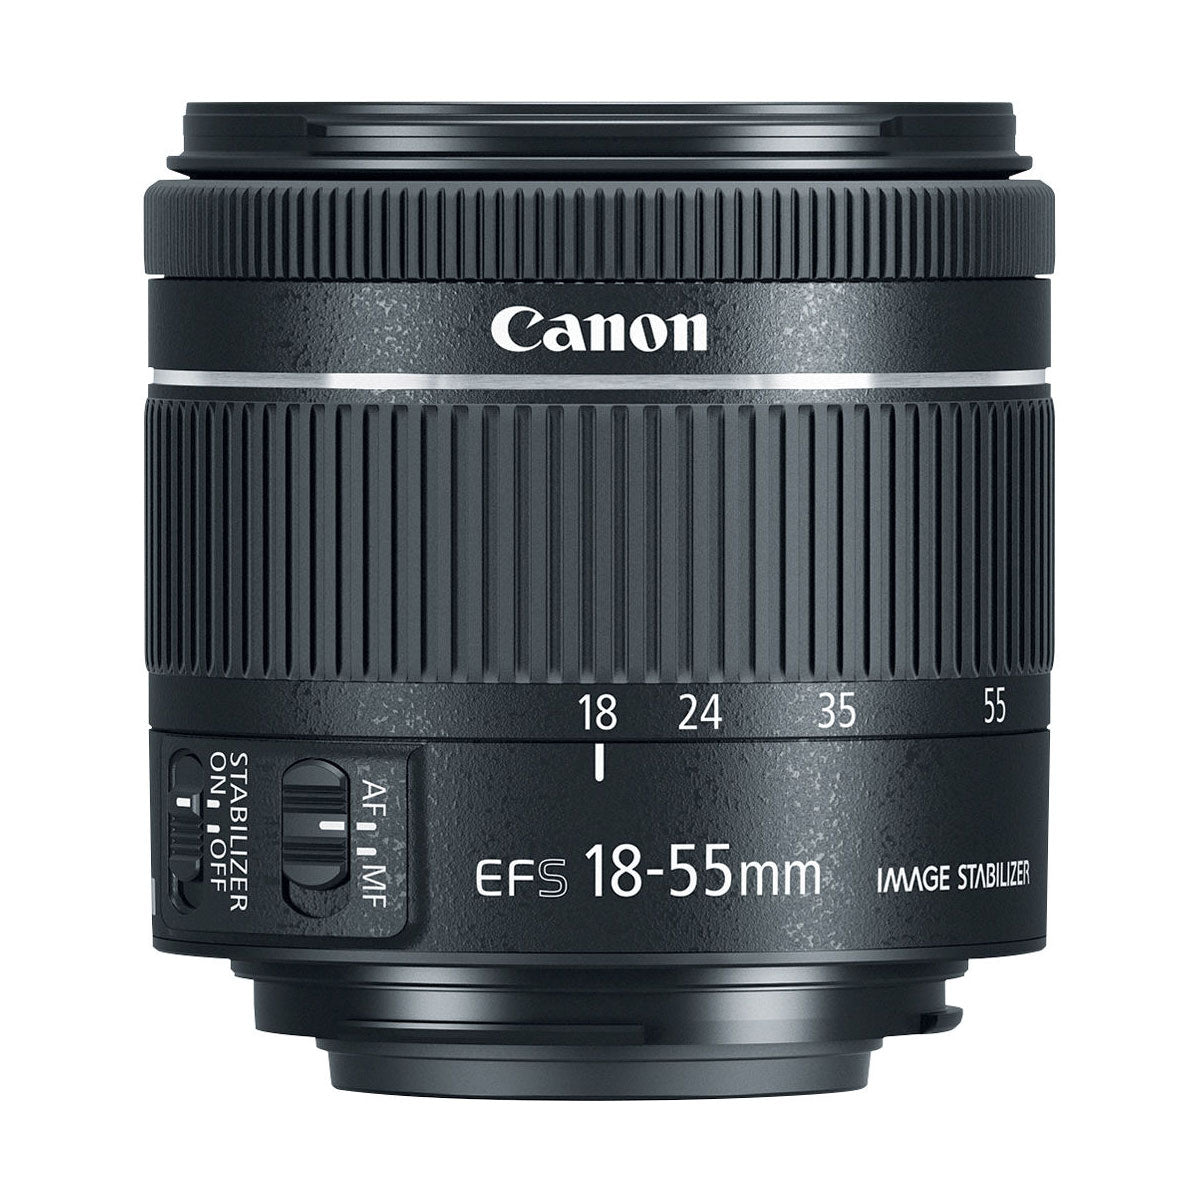 Canon EF-S 18-55mm f/4-5.6 IS STM Lens *OPEN BOX*